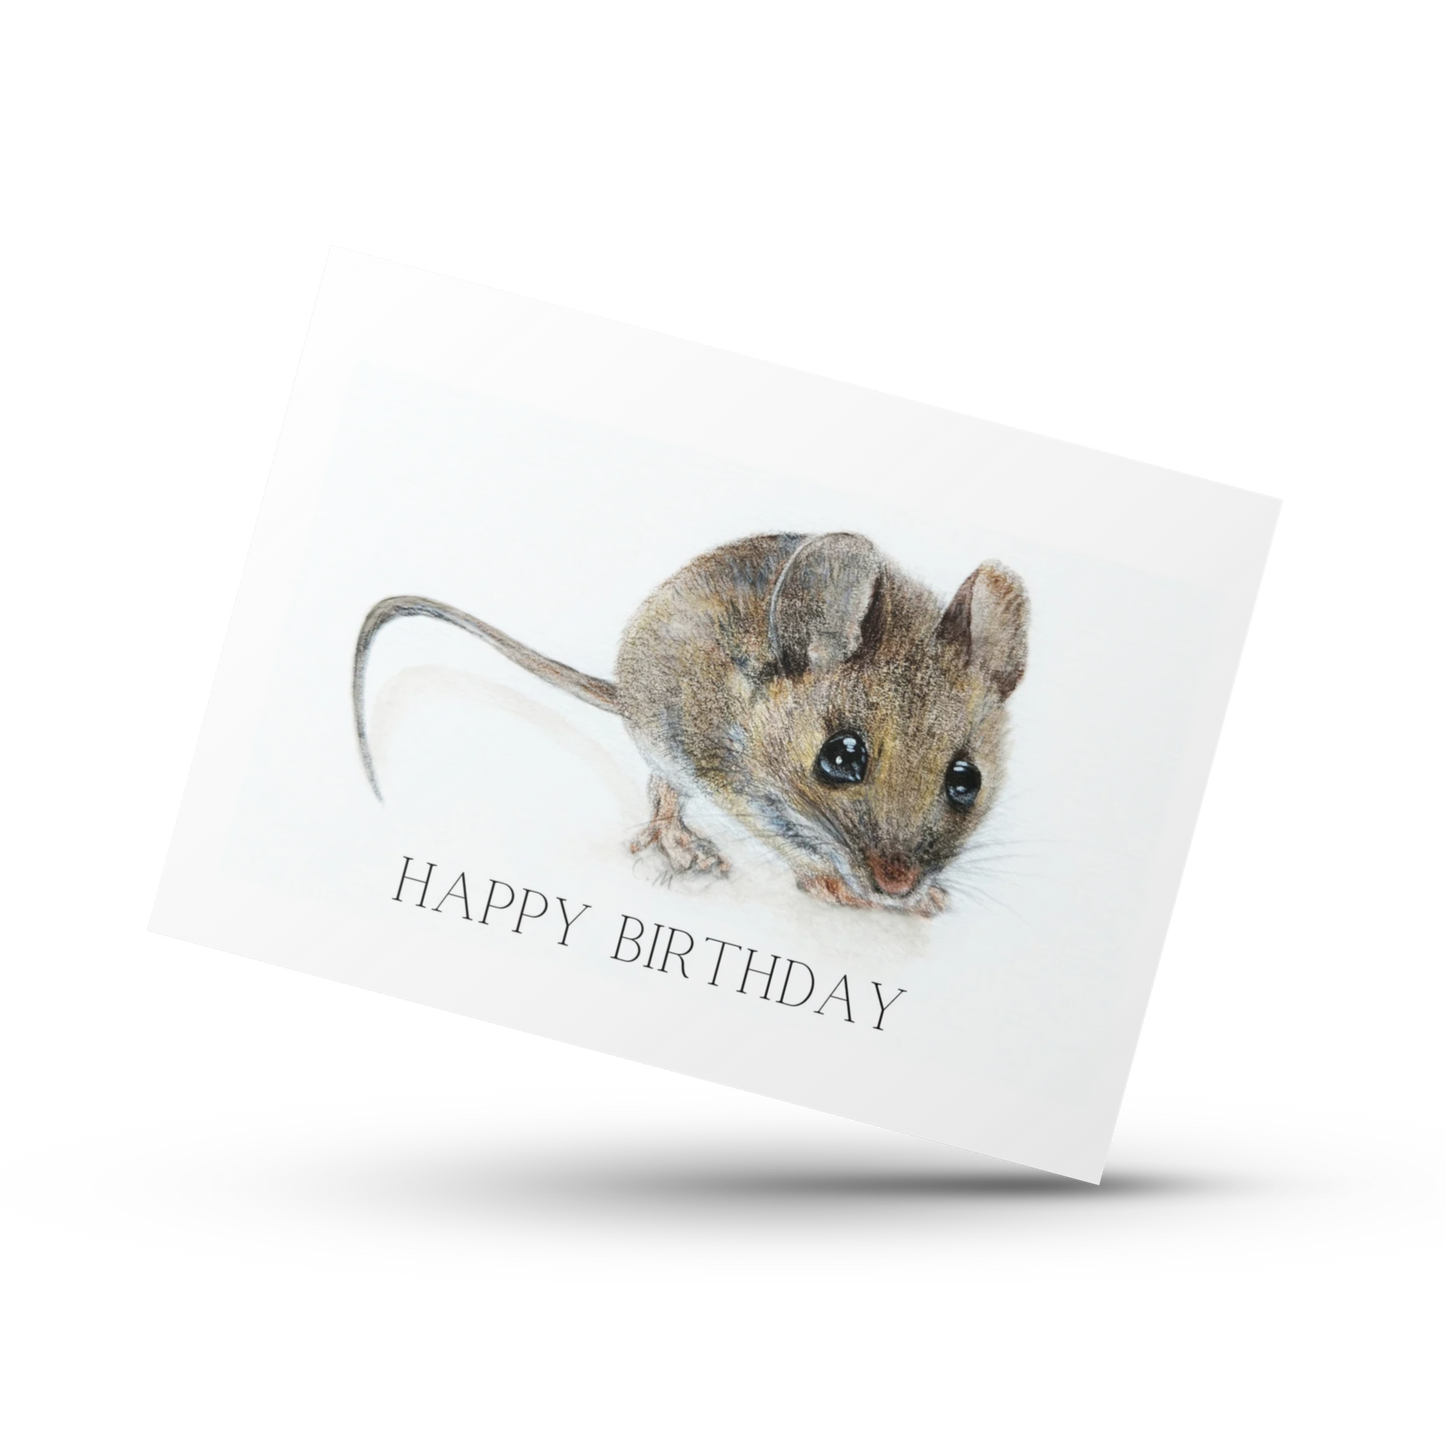 Happy Birthday Wildlife card, Whimsical woodland Mouse greeting, Outdoors adventure card, Baby mouse illustration, Card for children, Kids